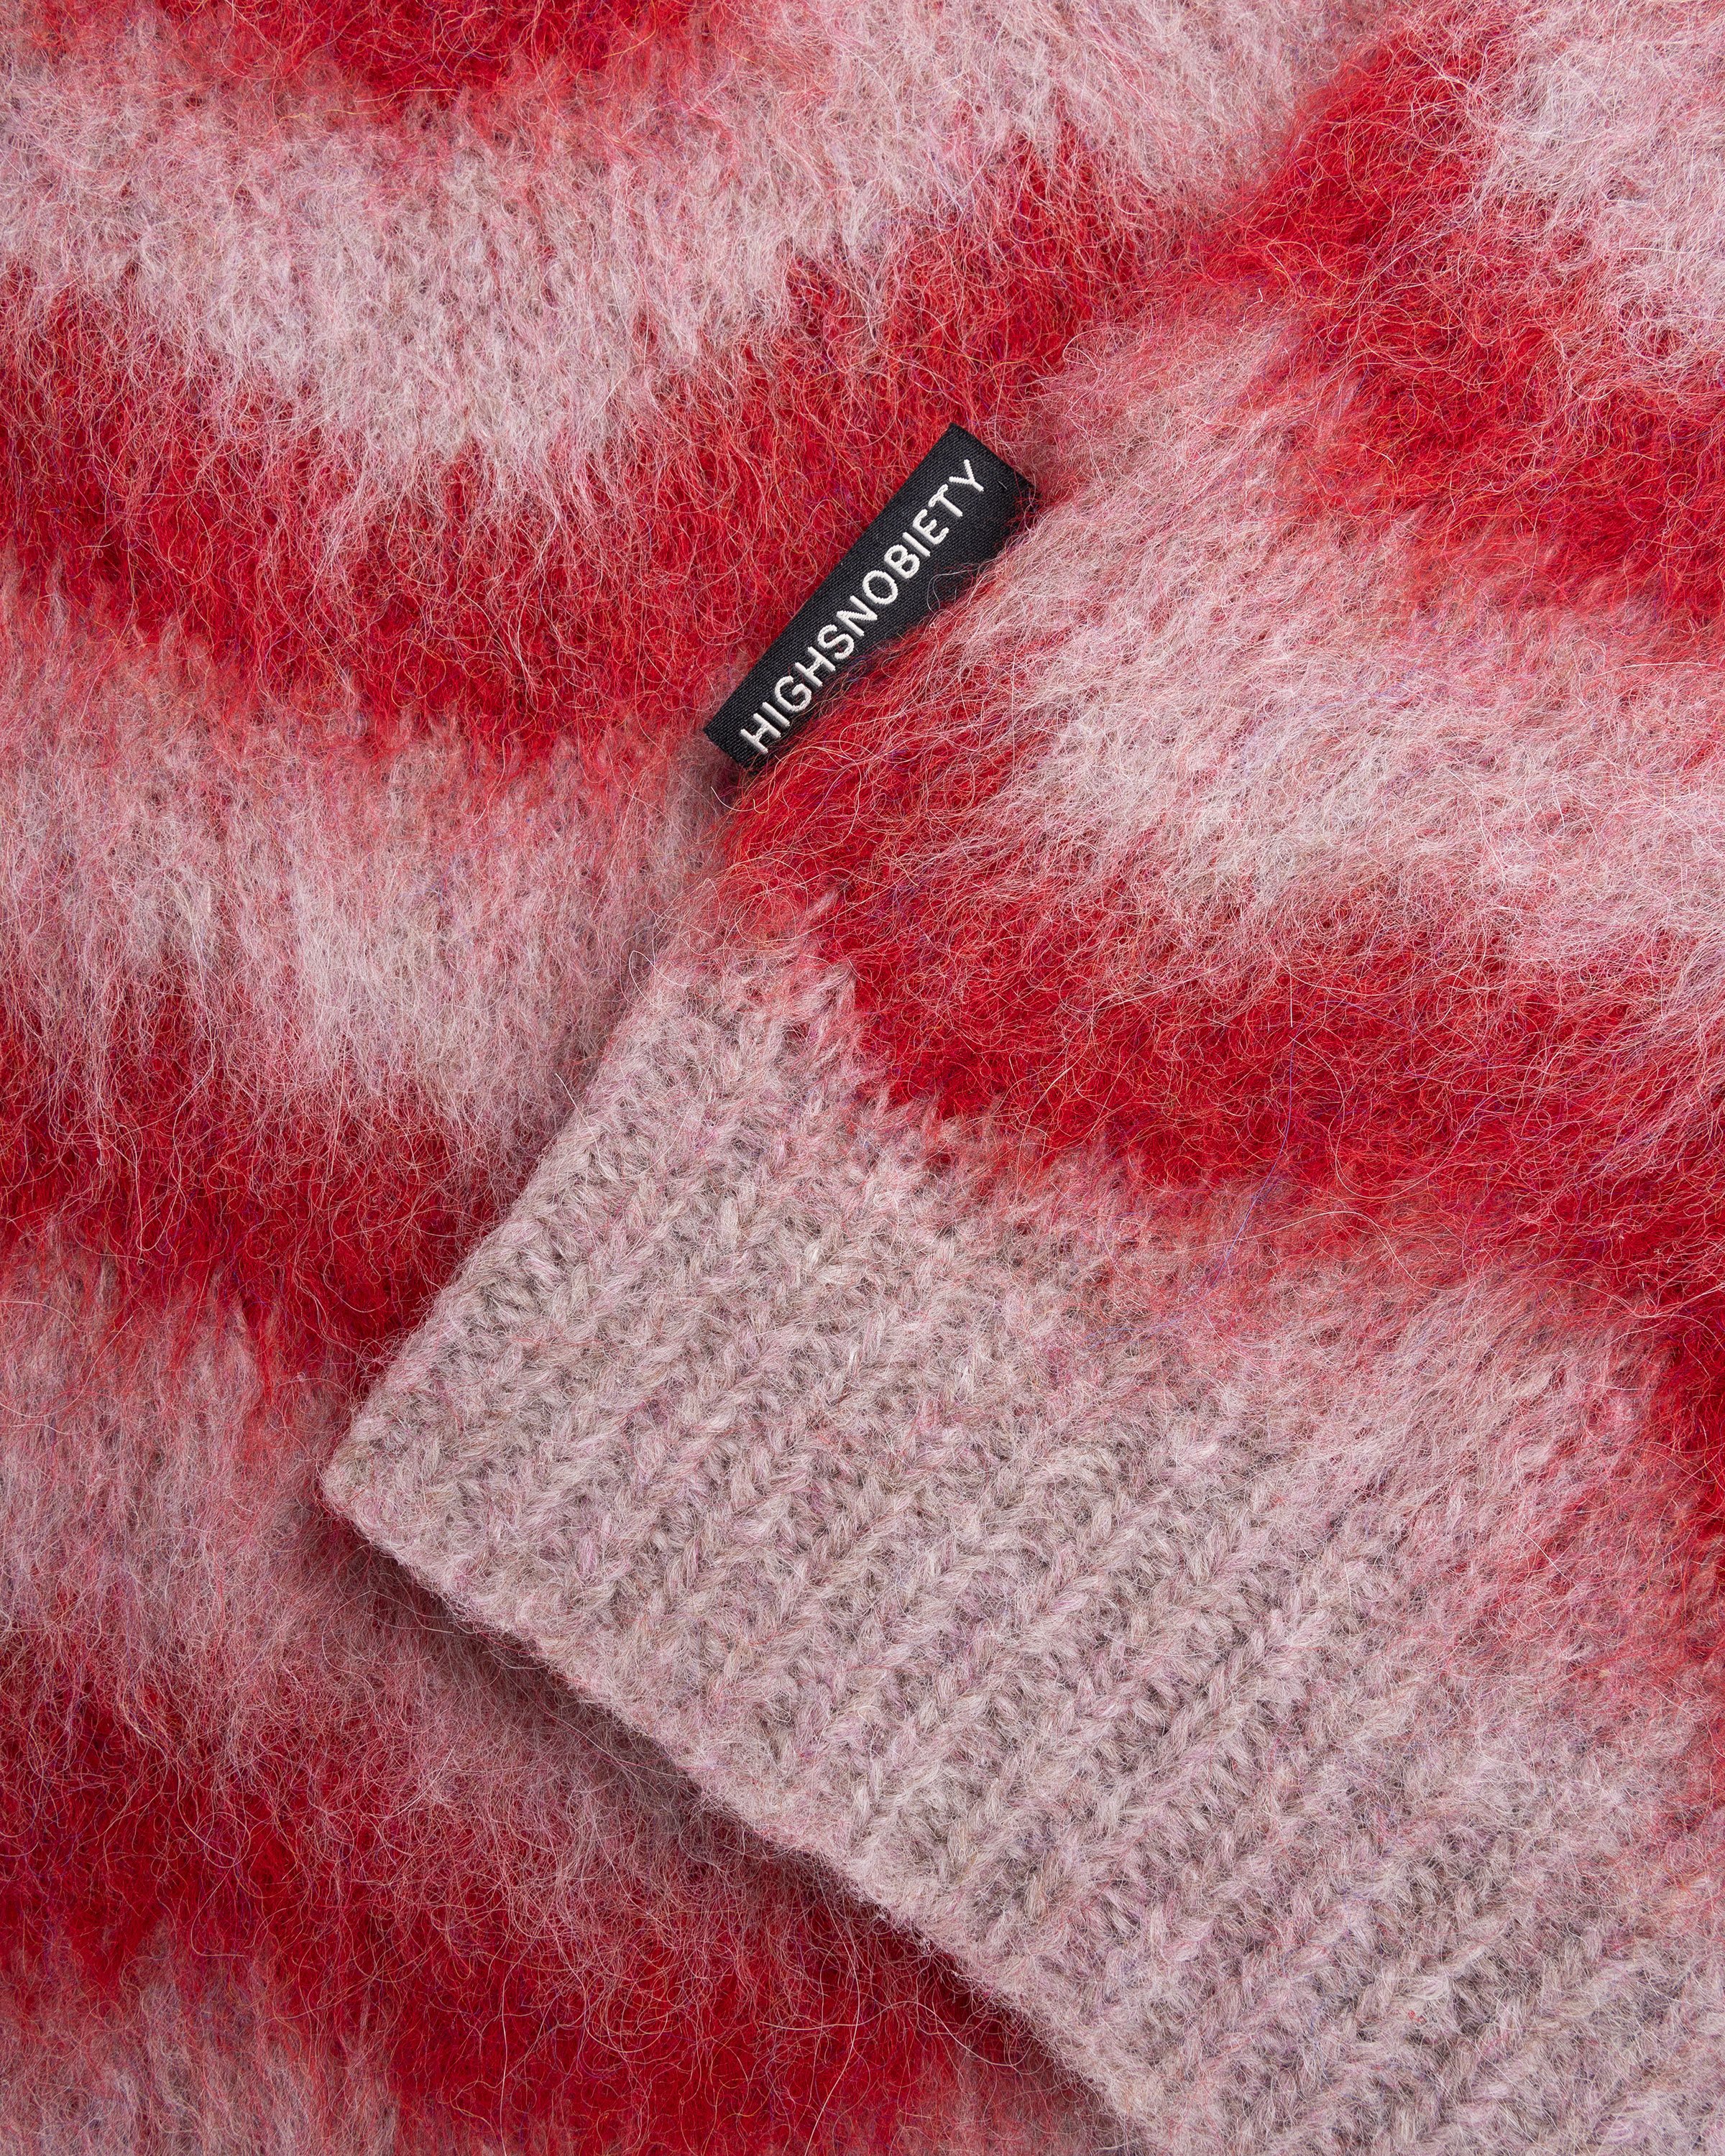 Highsnobiety HS05 - Alpaca Fuzzy Wave Sweater Vest Pale Rose/Red - Clothing - Multi - Image 7